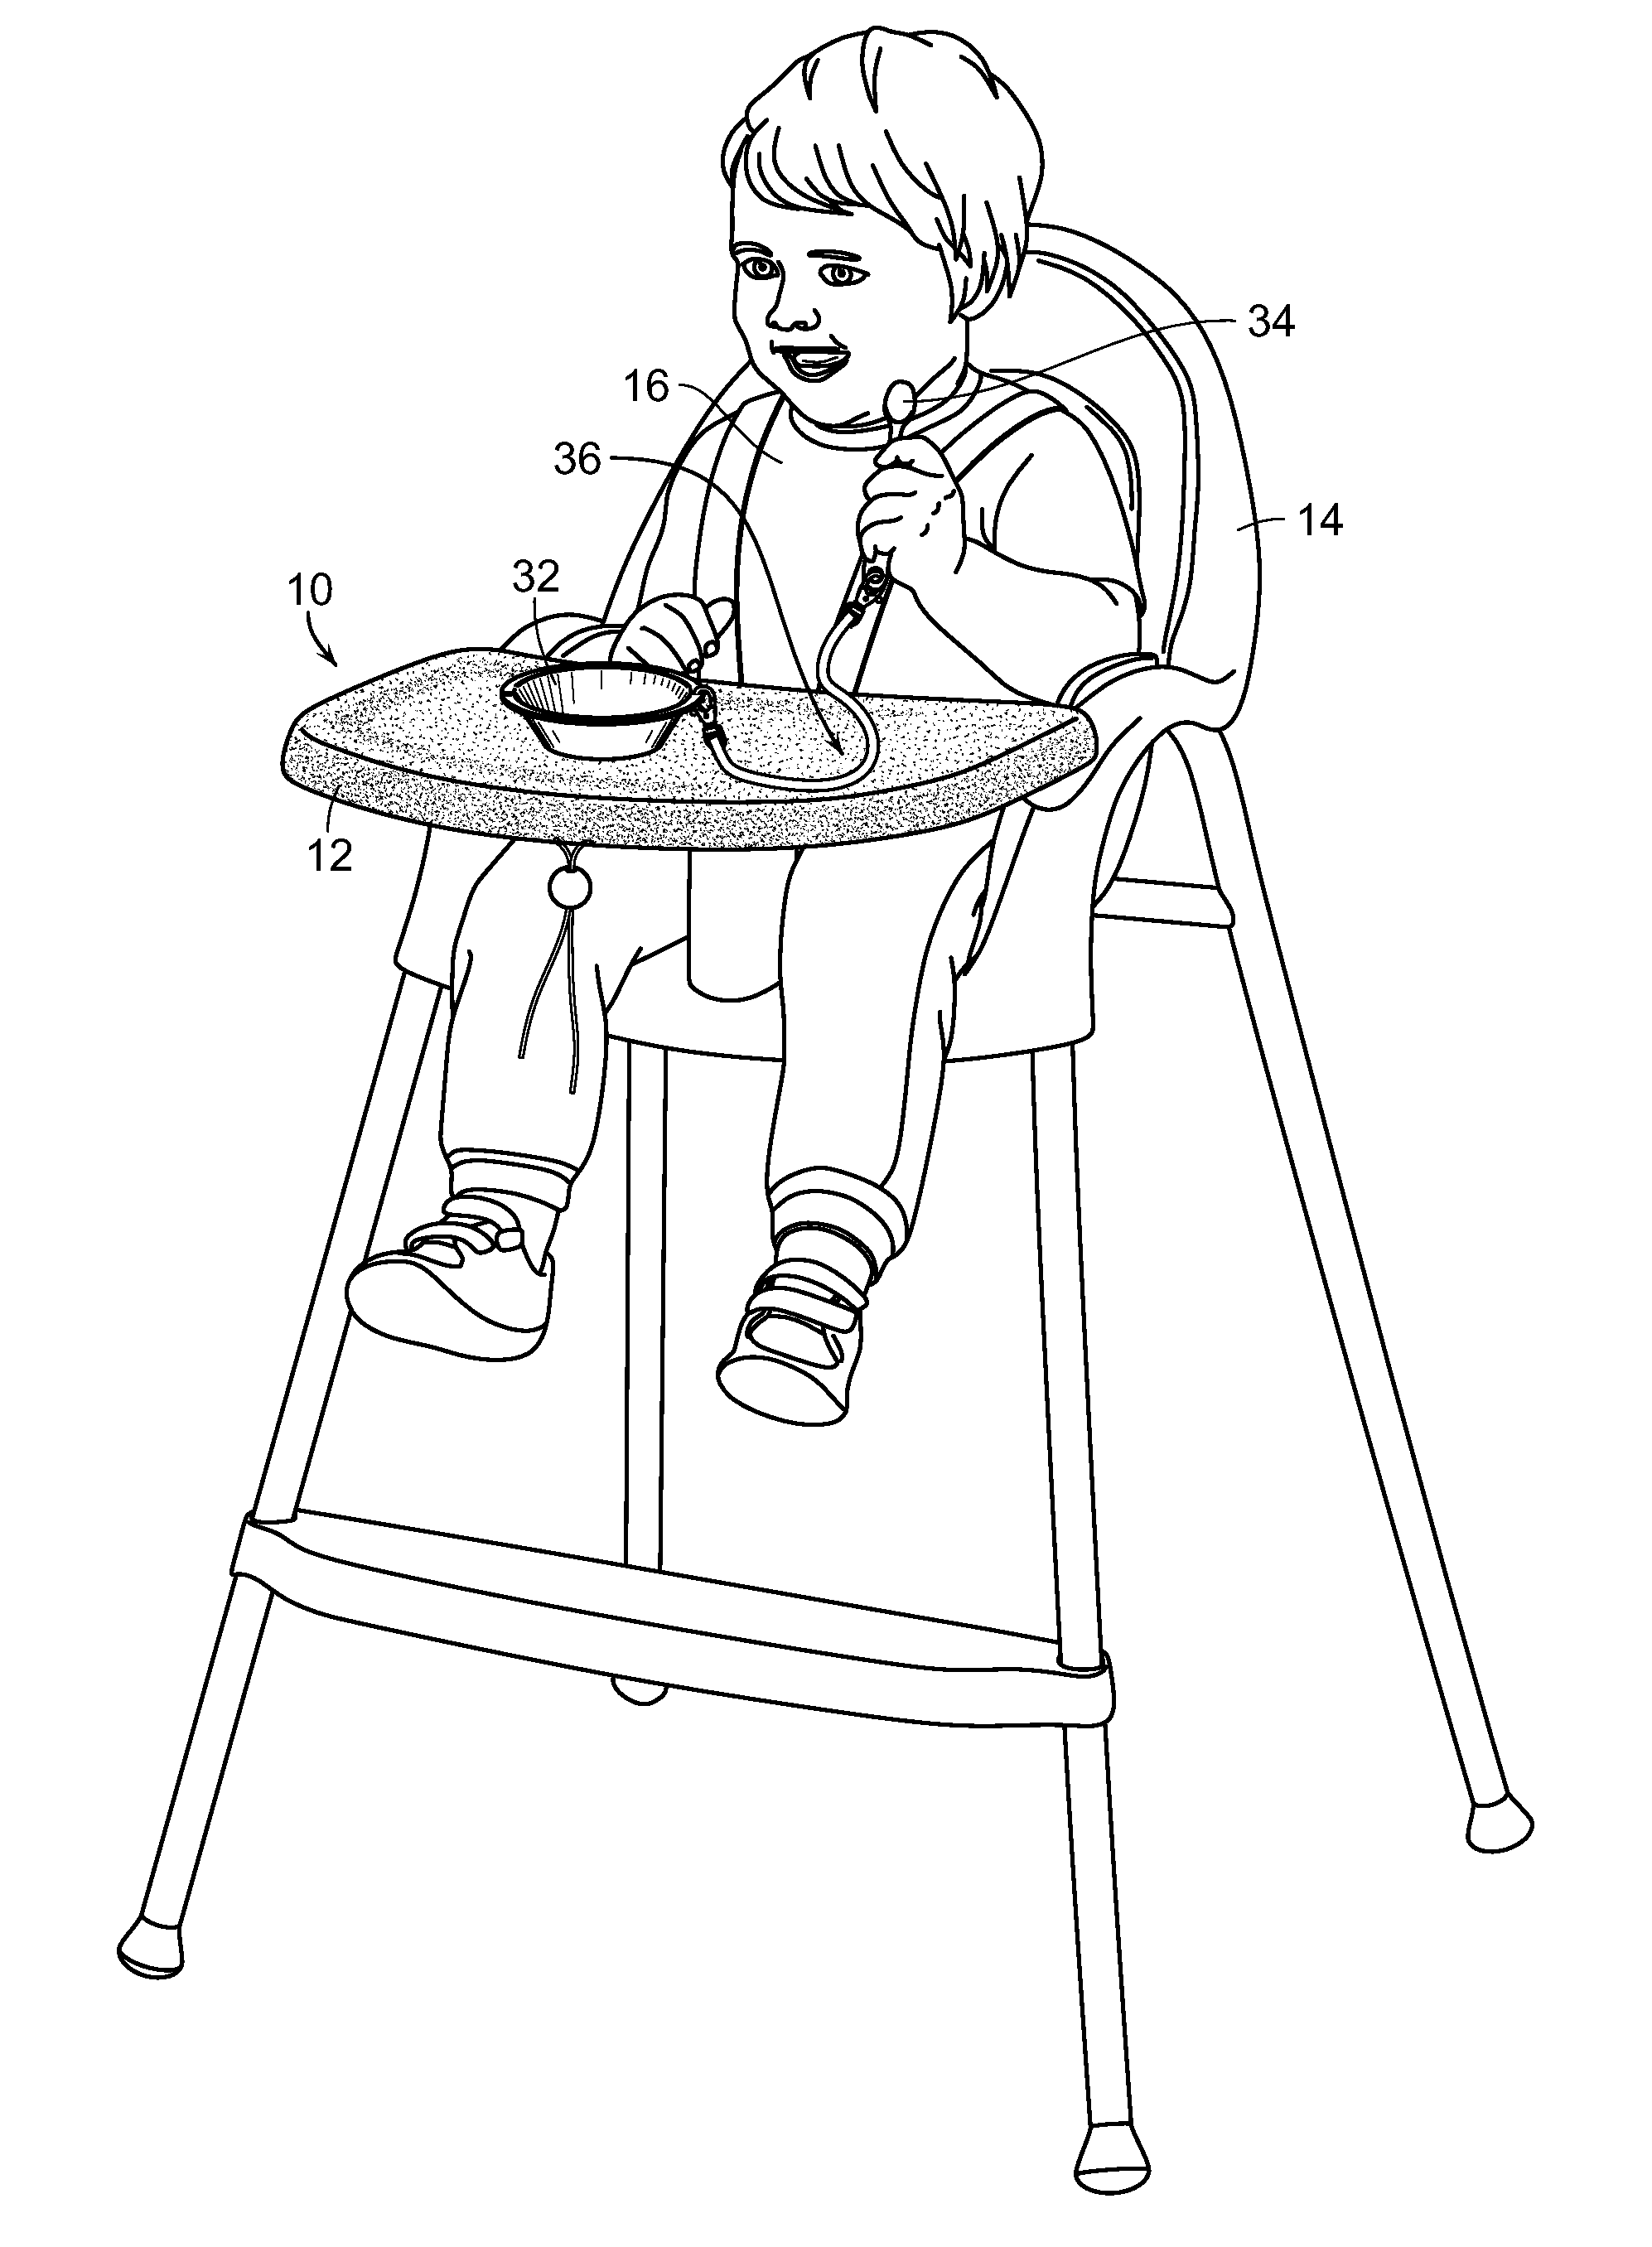 Highchair tray cover system with magnetically attachable objects